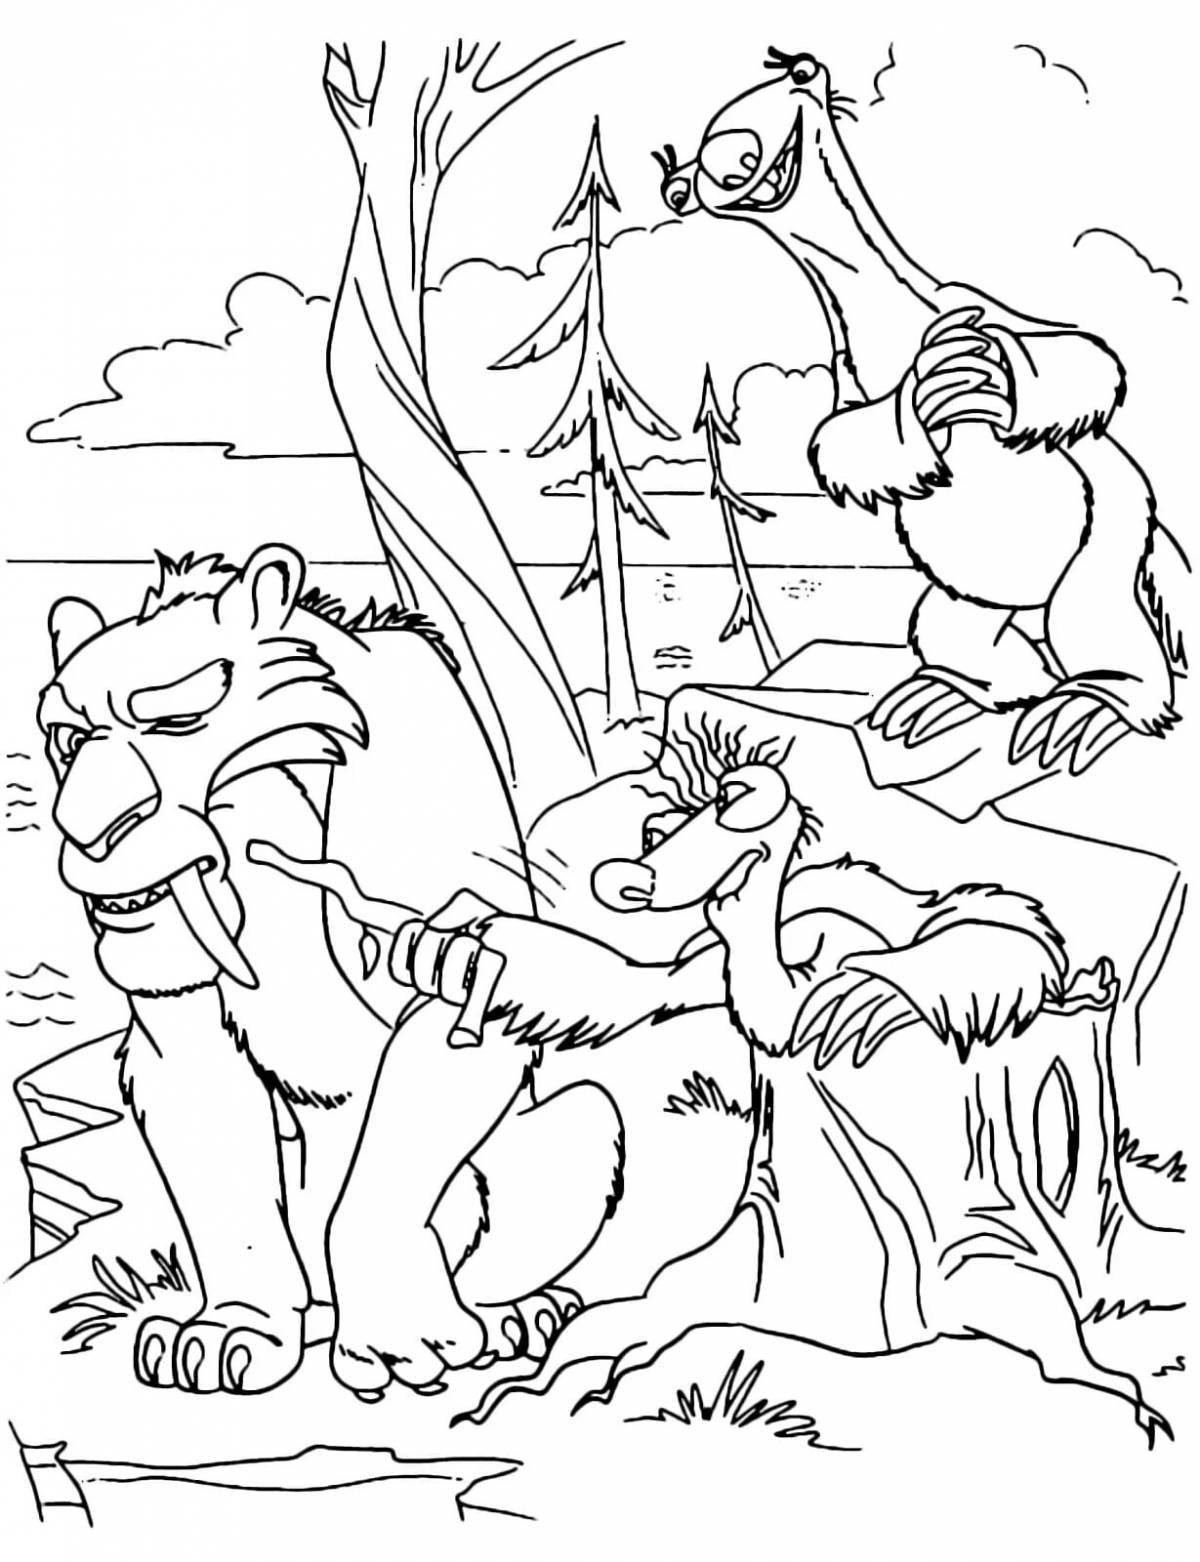 Delightful ice age 3 coloring book